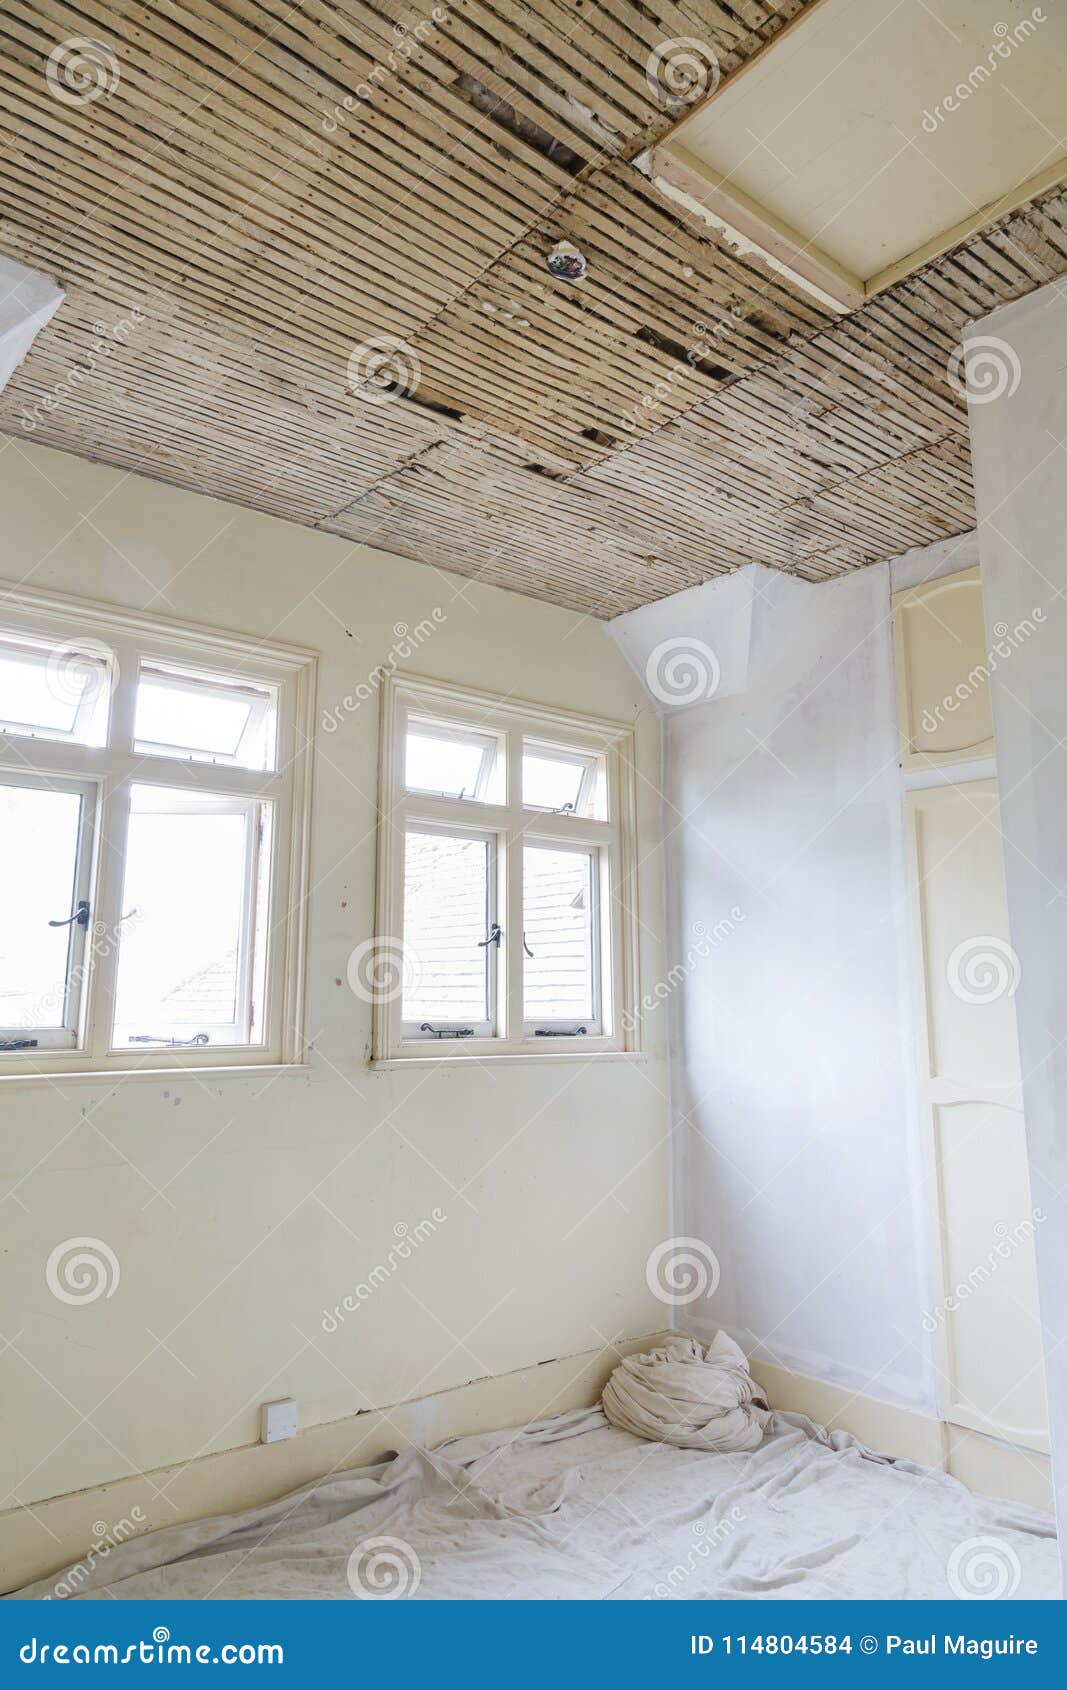 Home Improvement Interior Stock Photo Image Of Ceiling 114804584